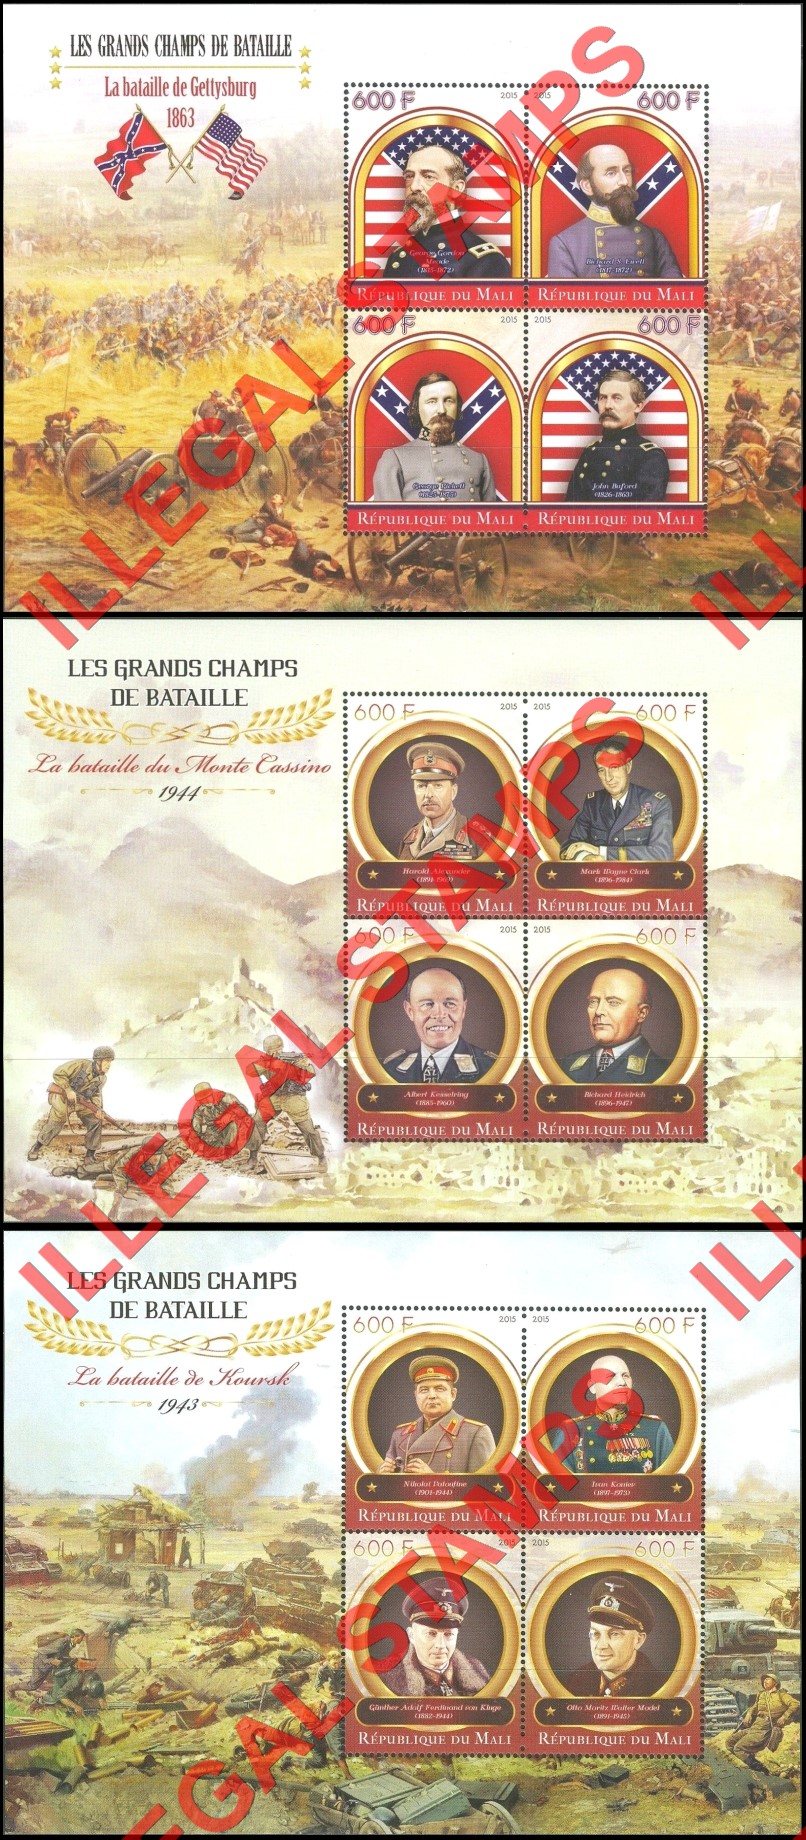 Mali 2015 Military Leaders and Battles Illegal Stamp Souvenir Sheets of 4 (Part 2)